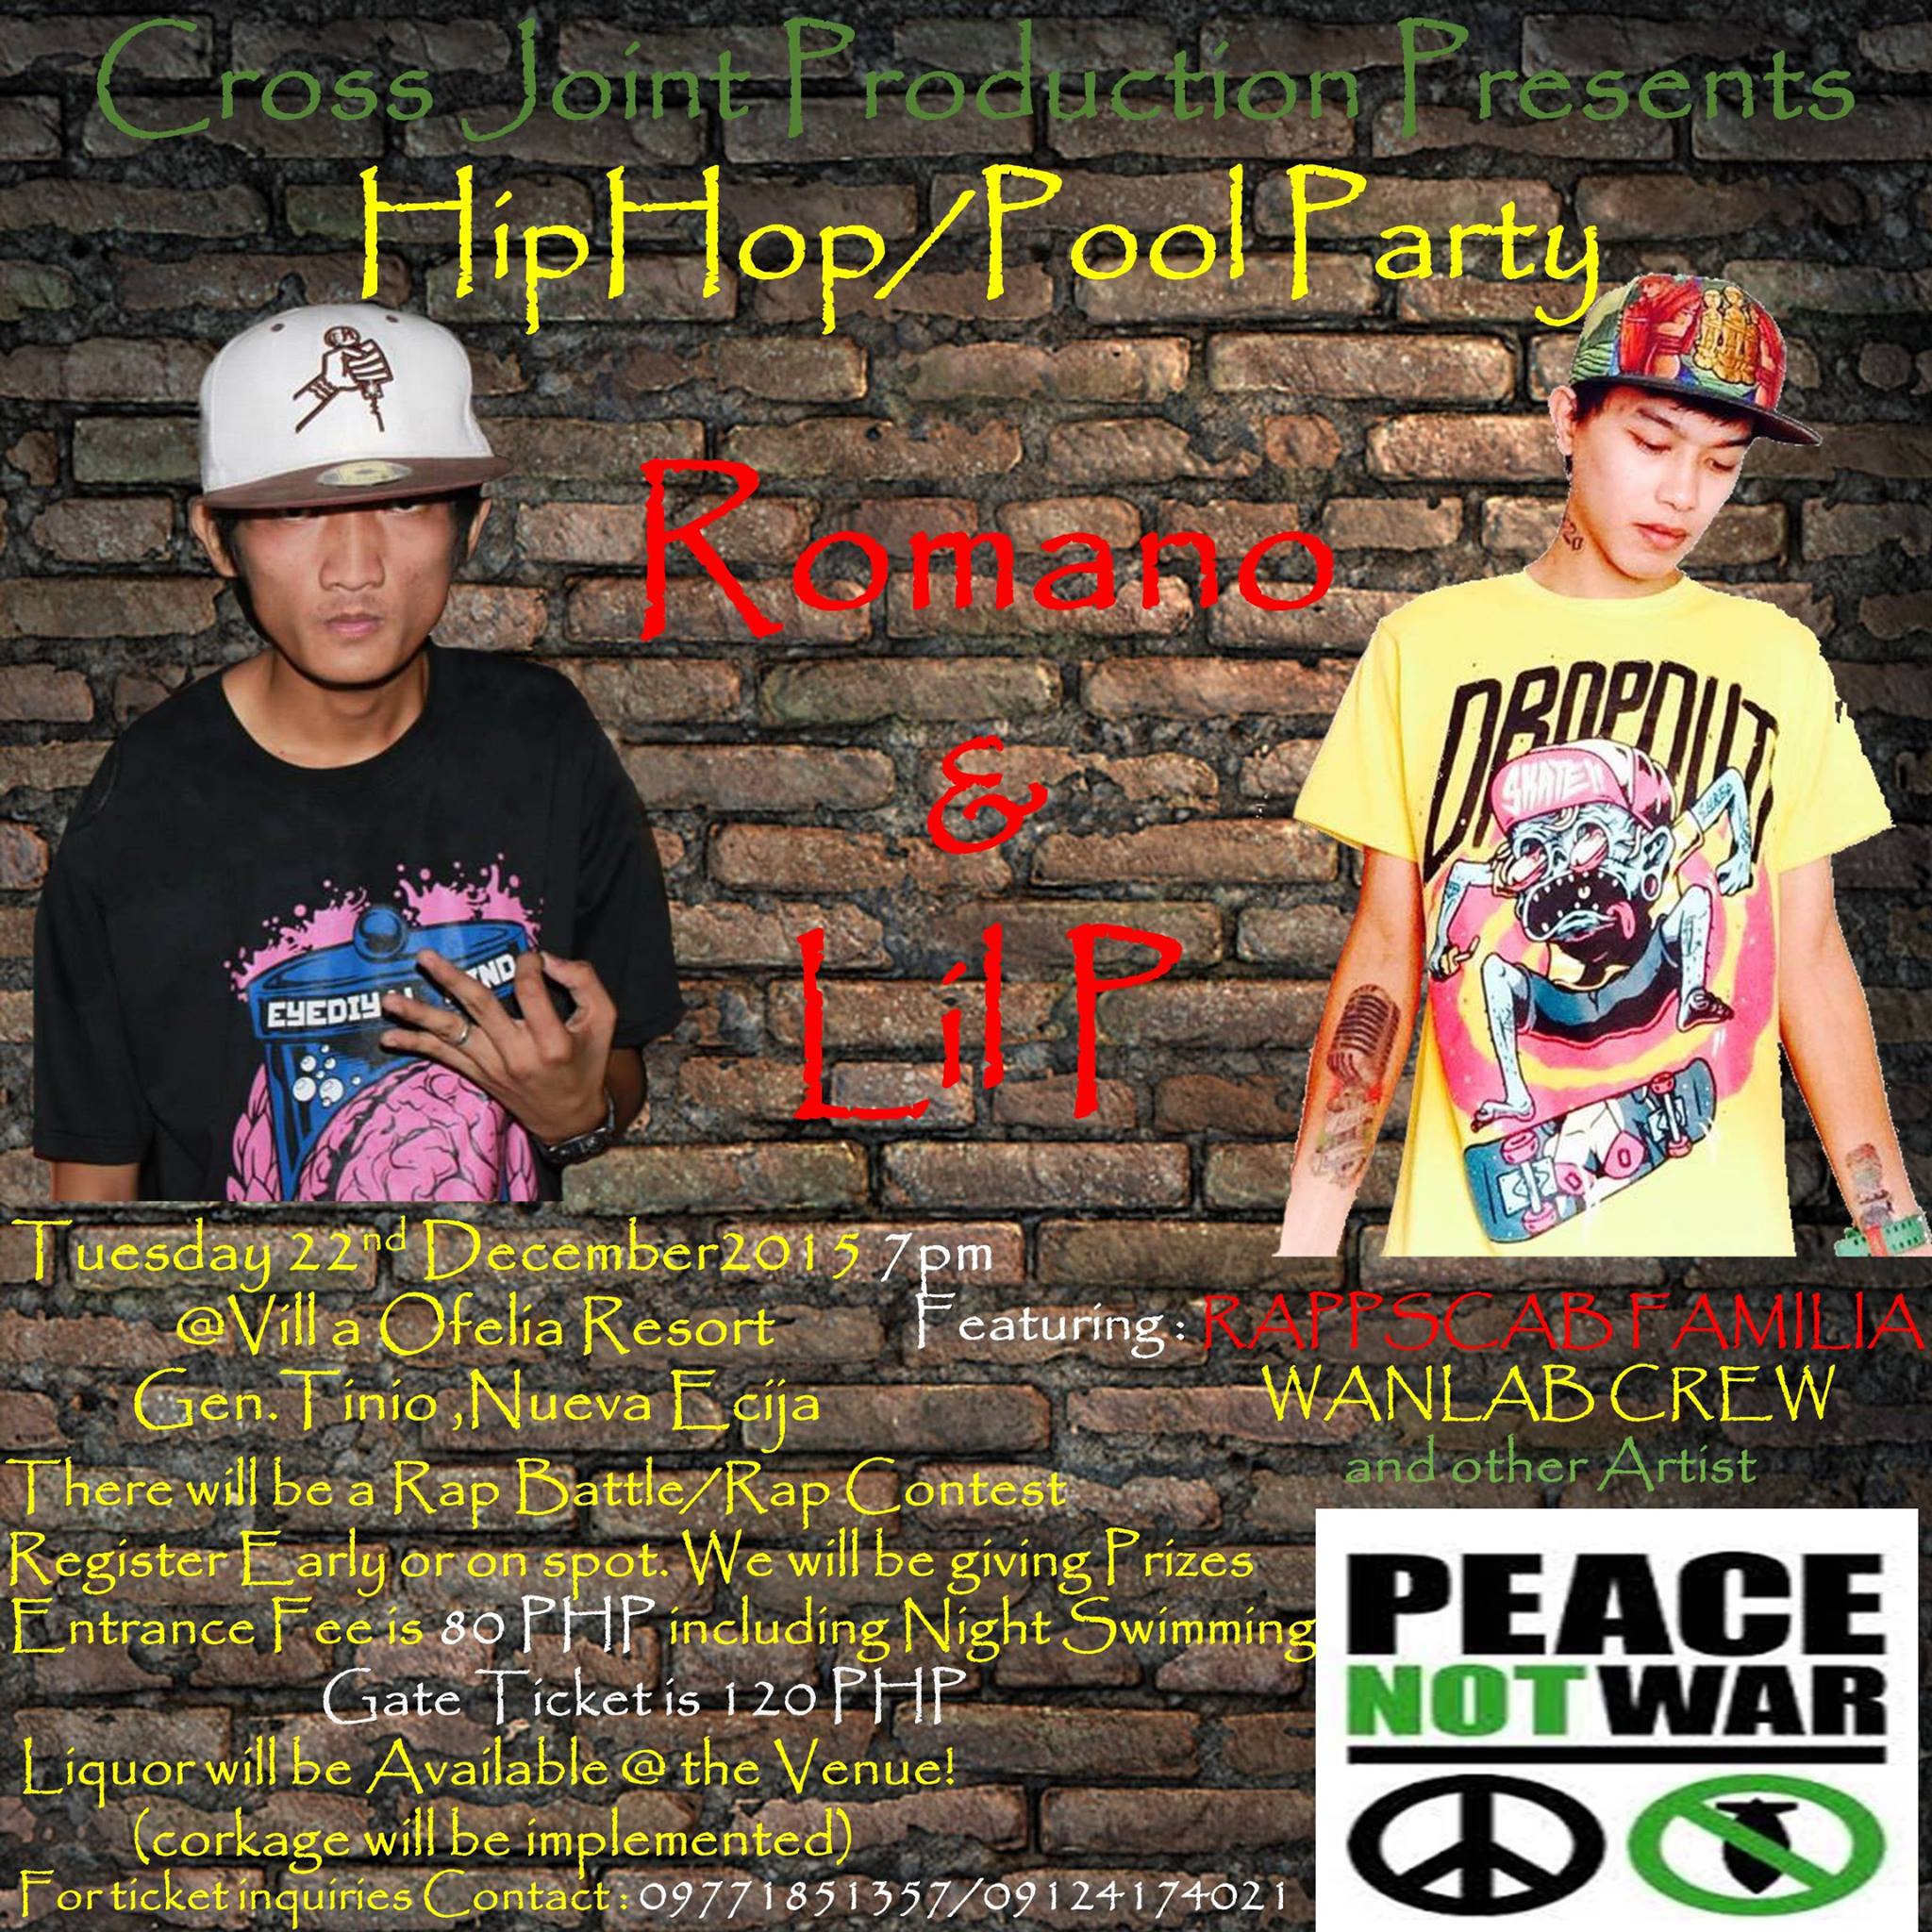 Hip Hop and Pool Party! clock Tuesday, December 22 at 7 PM Tomorrow · 86°F / 70°F Clear pin Show Map Villa Ofelia Resort Padolina, 3104 General Tinio, Nueva Ecija Hip Hop and Pool Party with Romano (Fliptop contender, and might be a Fliptop Champ this coming December) and Lil P is well known for his Rap Songs and promoting Peace and Unity! Some of his songs are "Ano nga ba ang meron ka? Part 1 & 2" and "Pagkakaisa". They're also a Member of Rappscab Familia. Come and Join us in this upcoming event! And Support our local artist for the Hip Hop Movement in Nueva Ecija! Everyone is welcome, this will be a pure Peace, Fun and no War! So grab your friends and enjoy the party and night swimming! (Open Fire!) For tickets and inquiries Contact : 09771851357/09124174021 See poster for other details! Thanks! Peace!